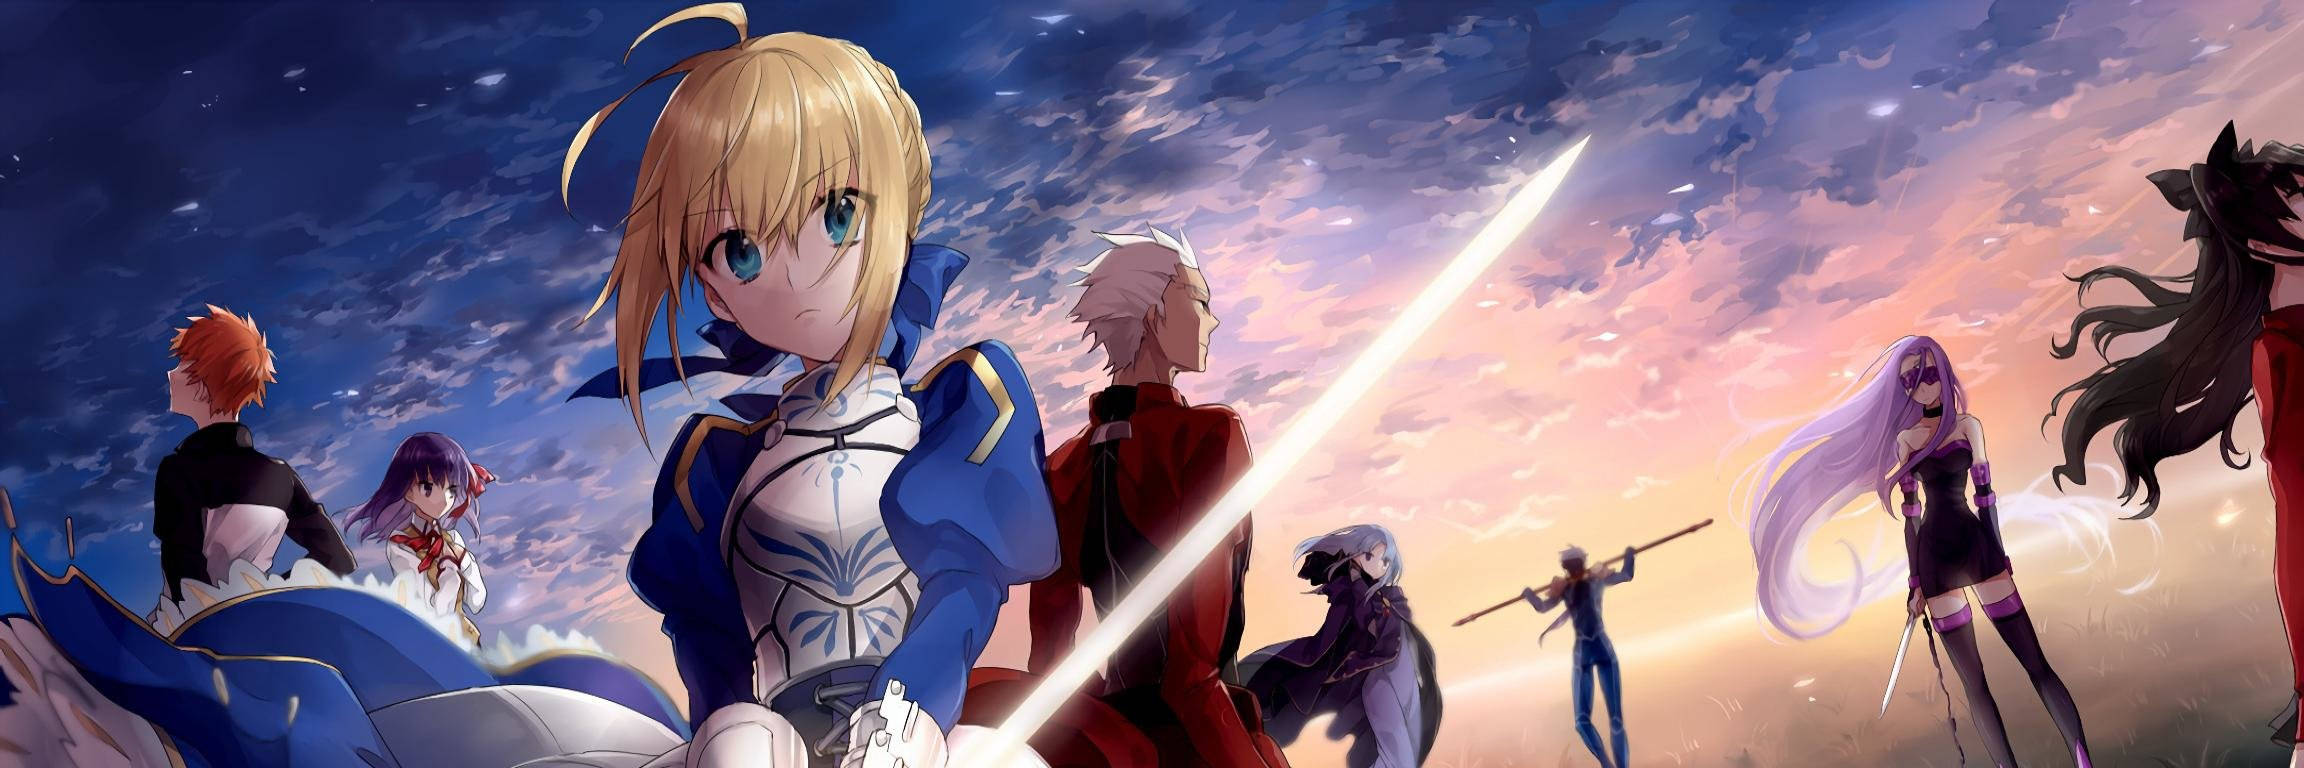 Fate / Stay Night Anime Characters